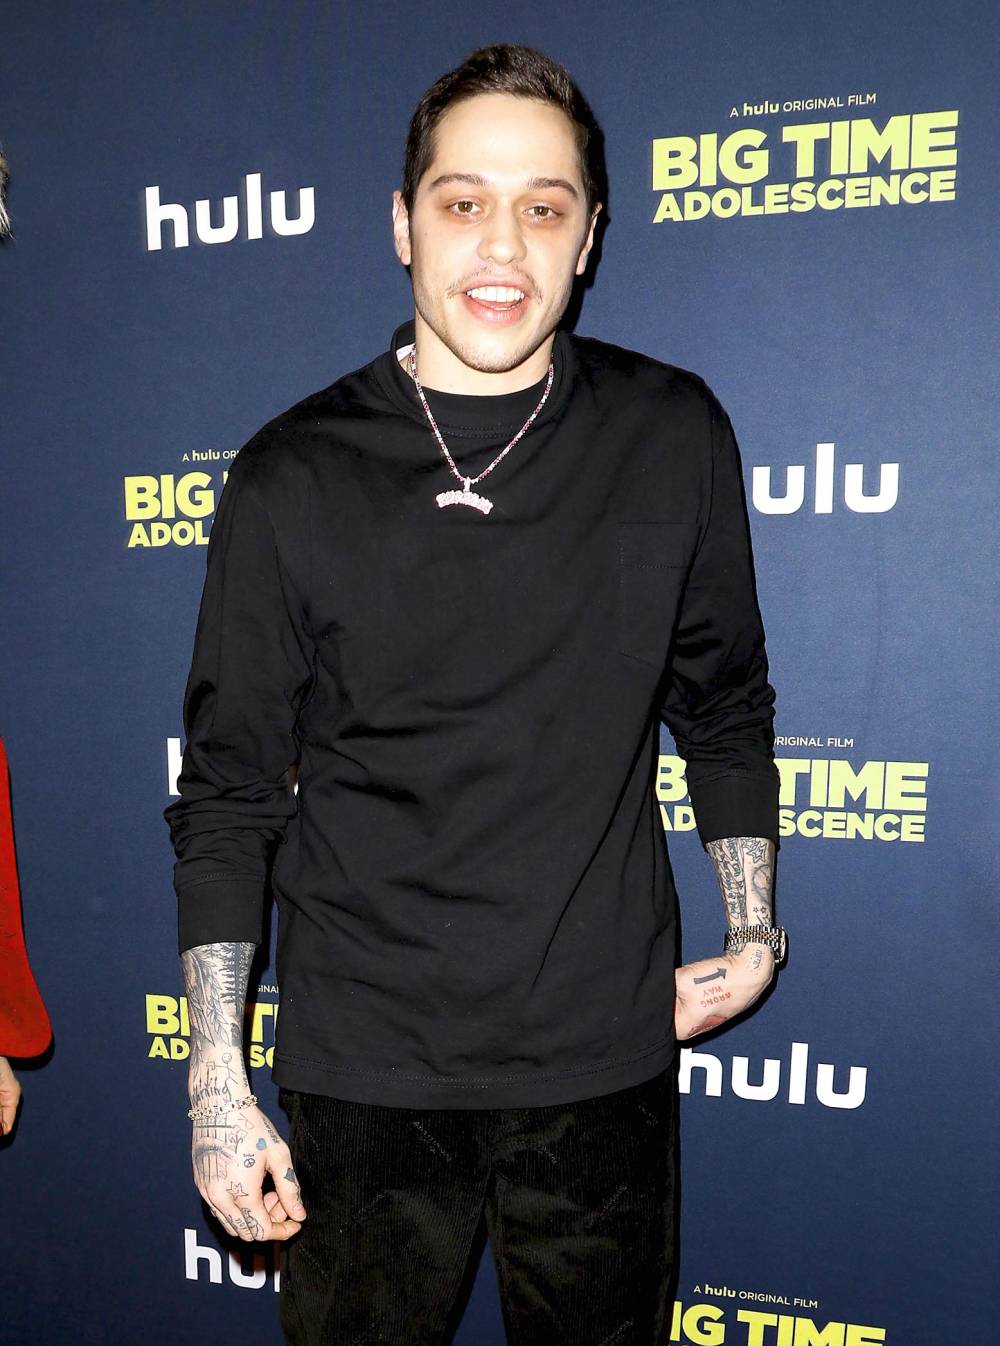 Pete Davidson Absent From 'Saturday Night Live' After Slamming Show